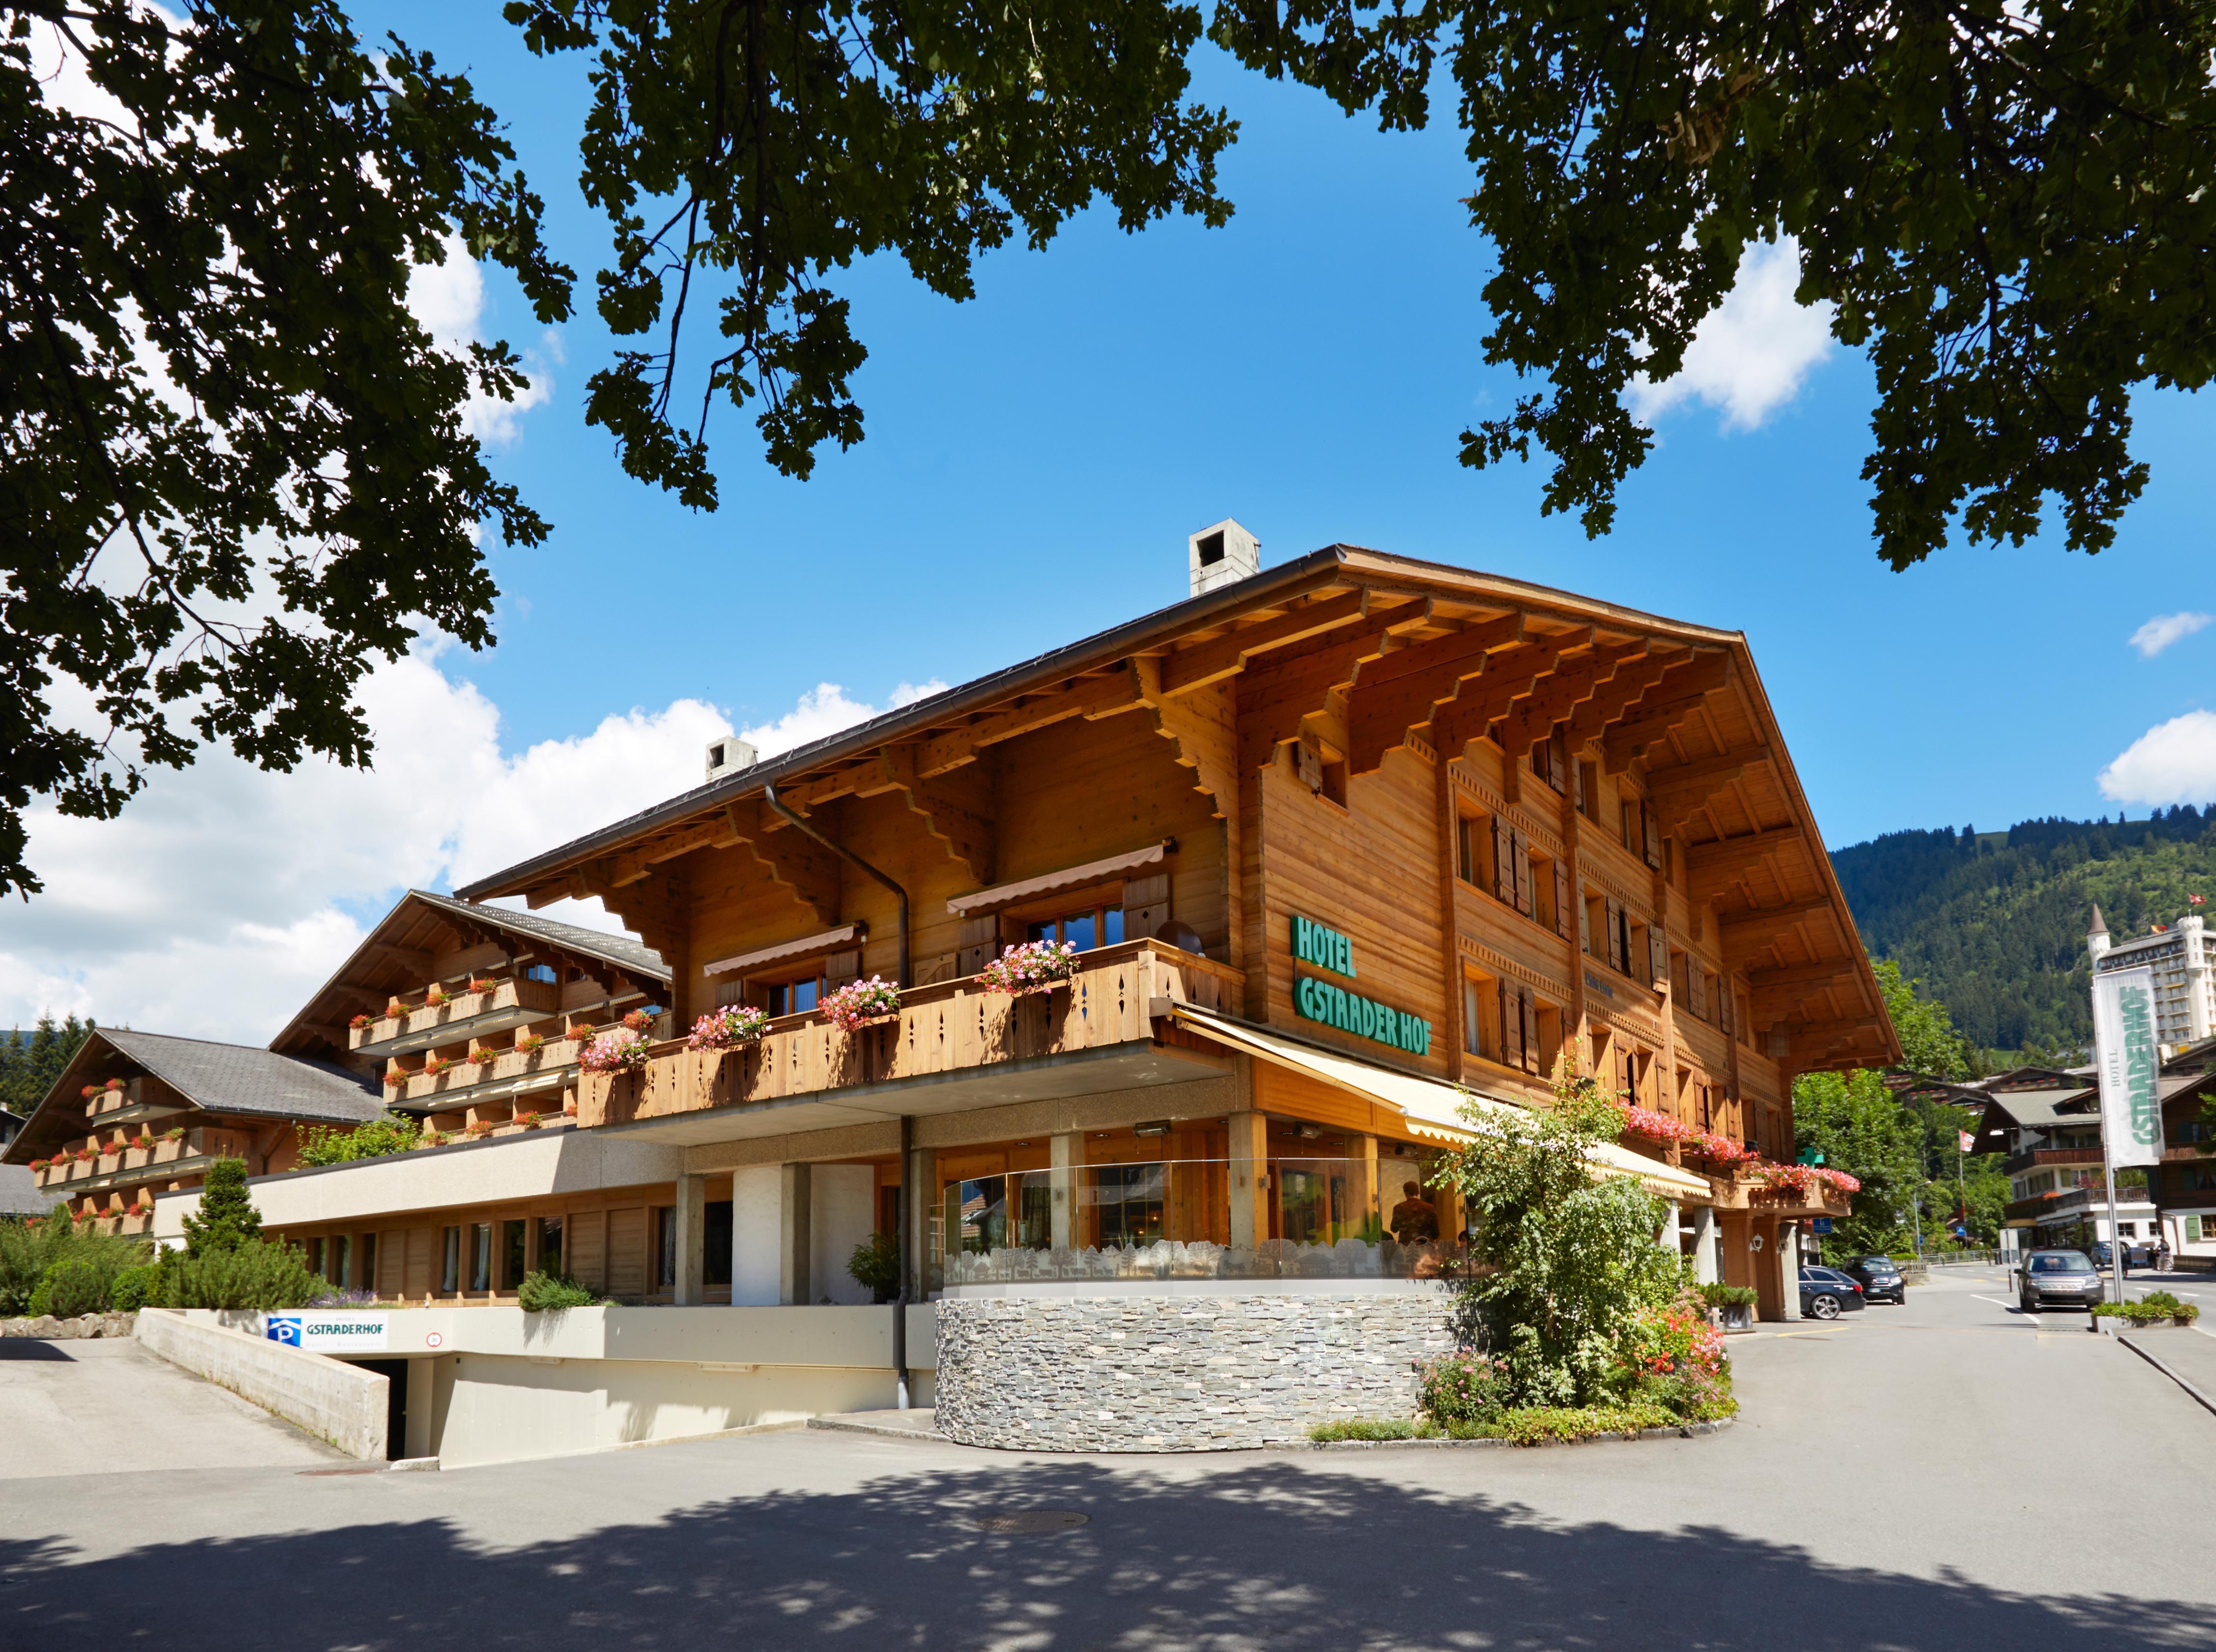 Gstaaderhof - Active & Relax Hotel Exterior photo